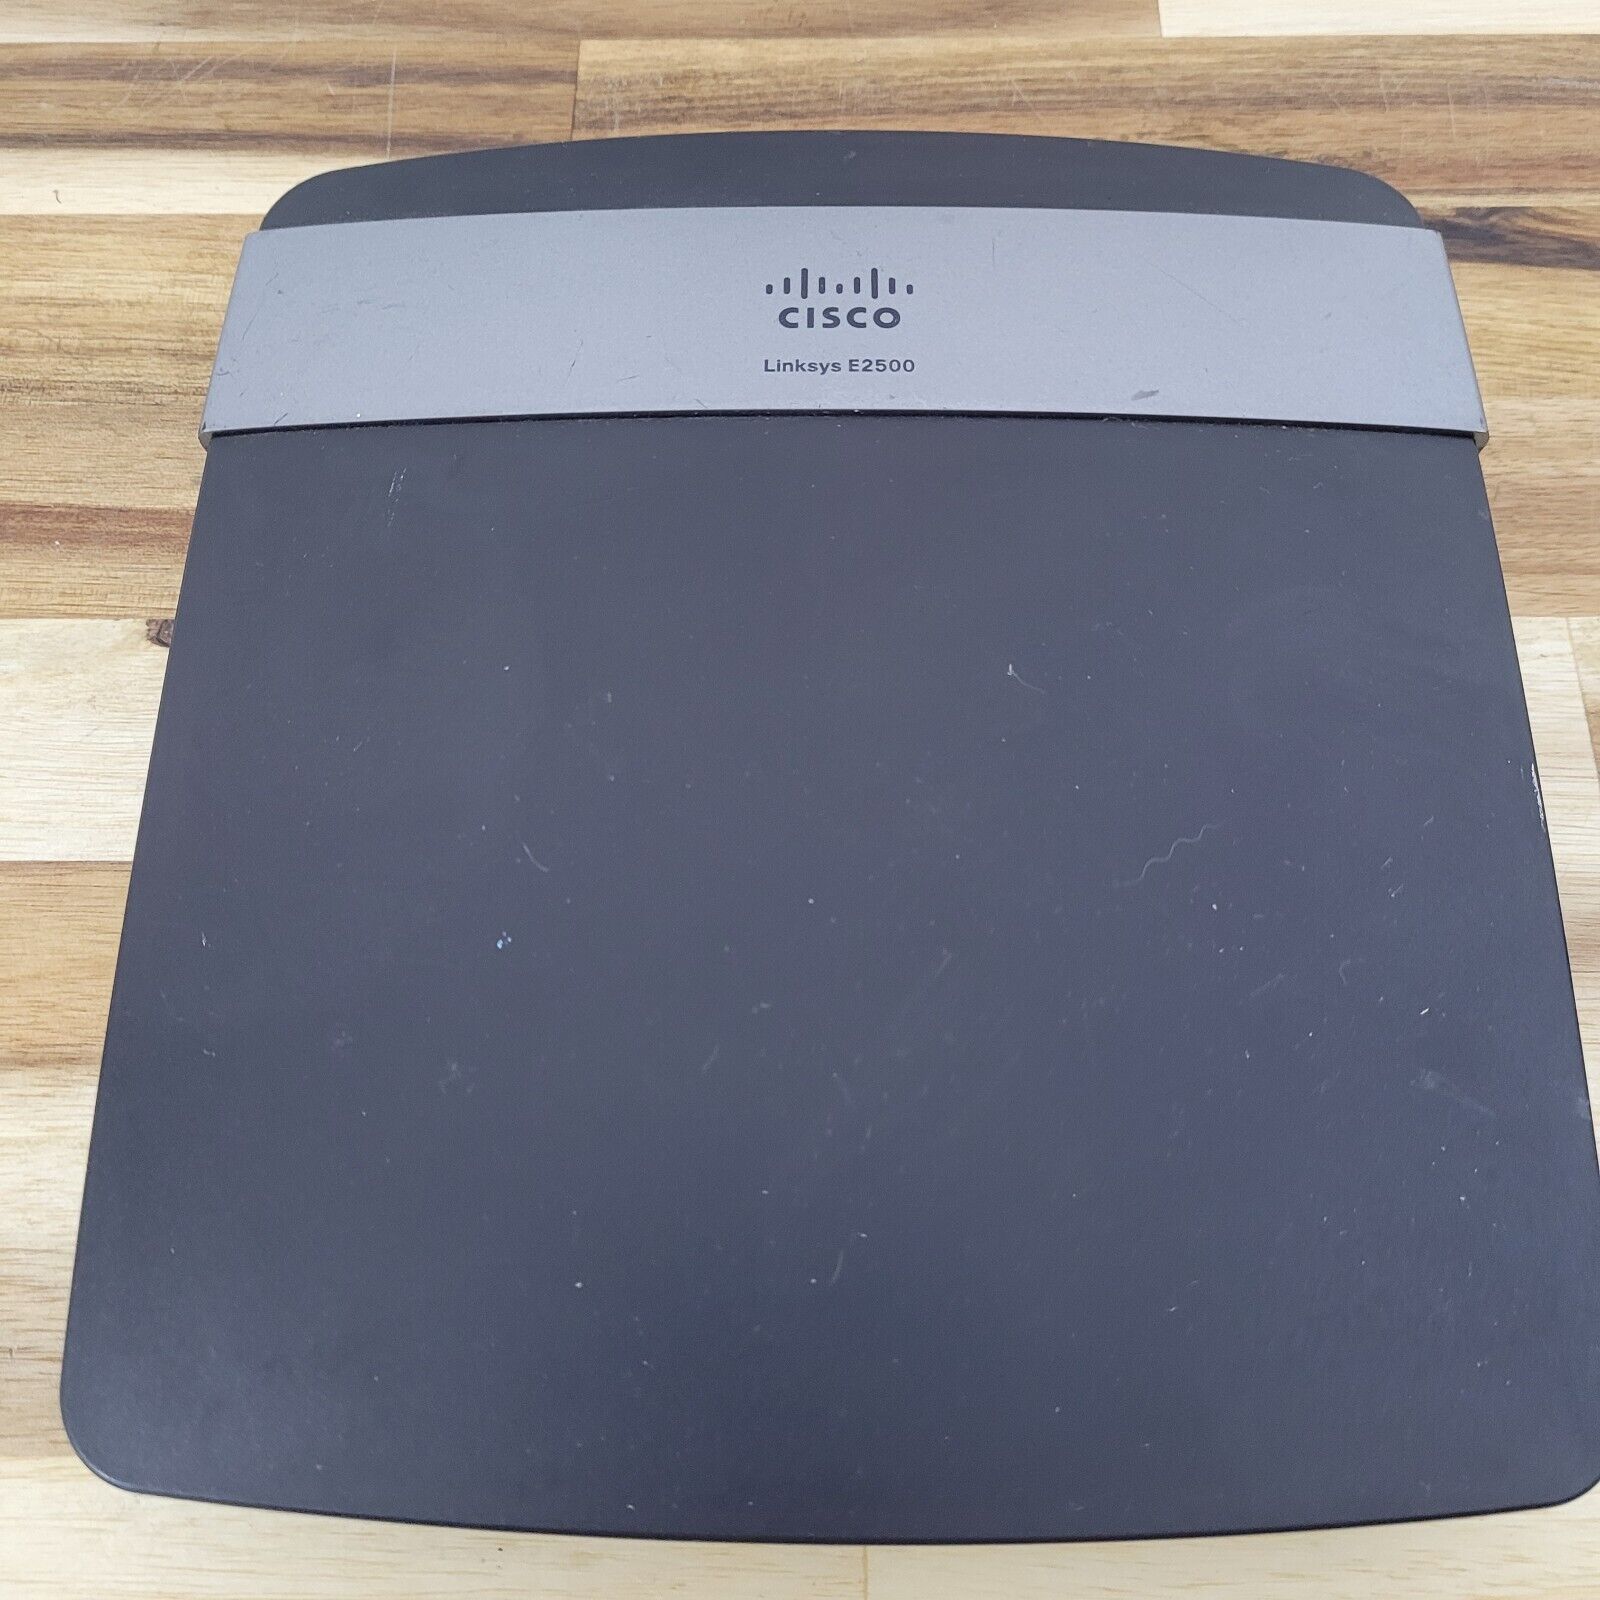 CISCO Linksys E2500 Dual-Band 300Mbps 4 Port Wireless N Router 2.4 Ghz 5 Ghz